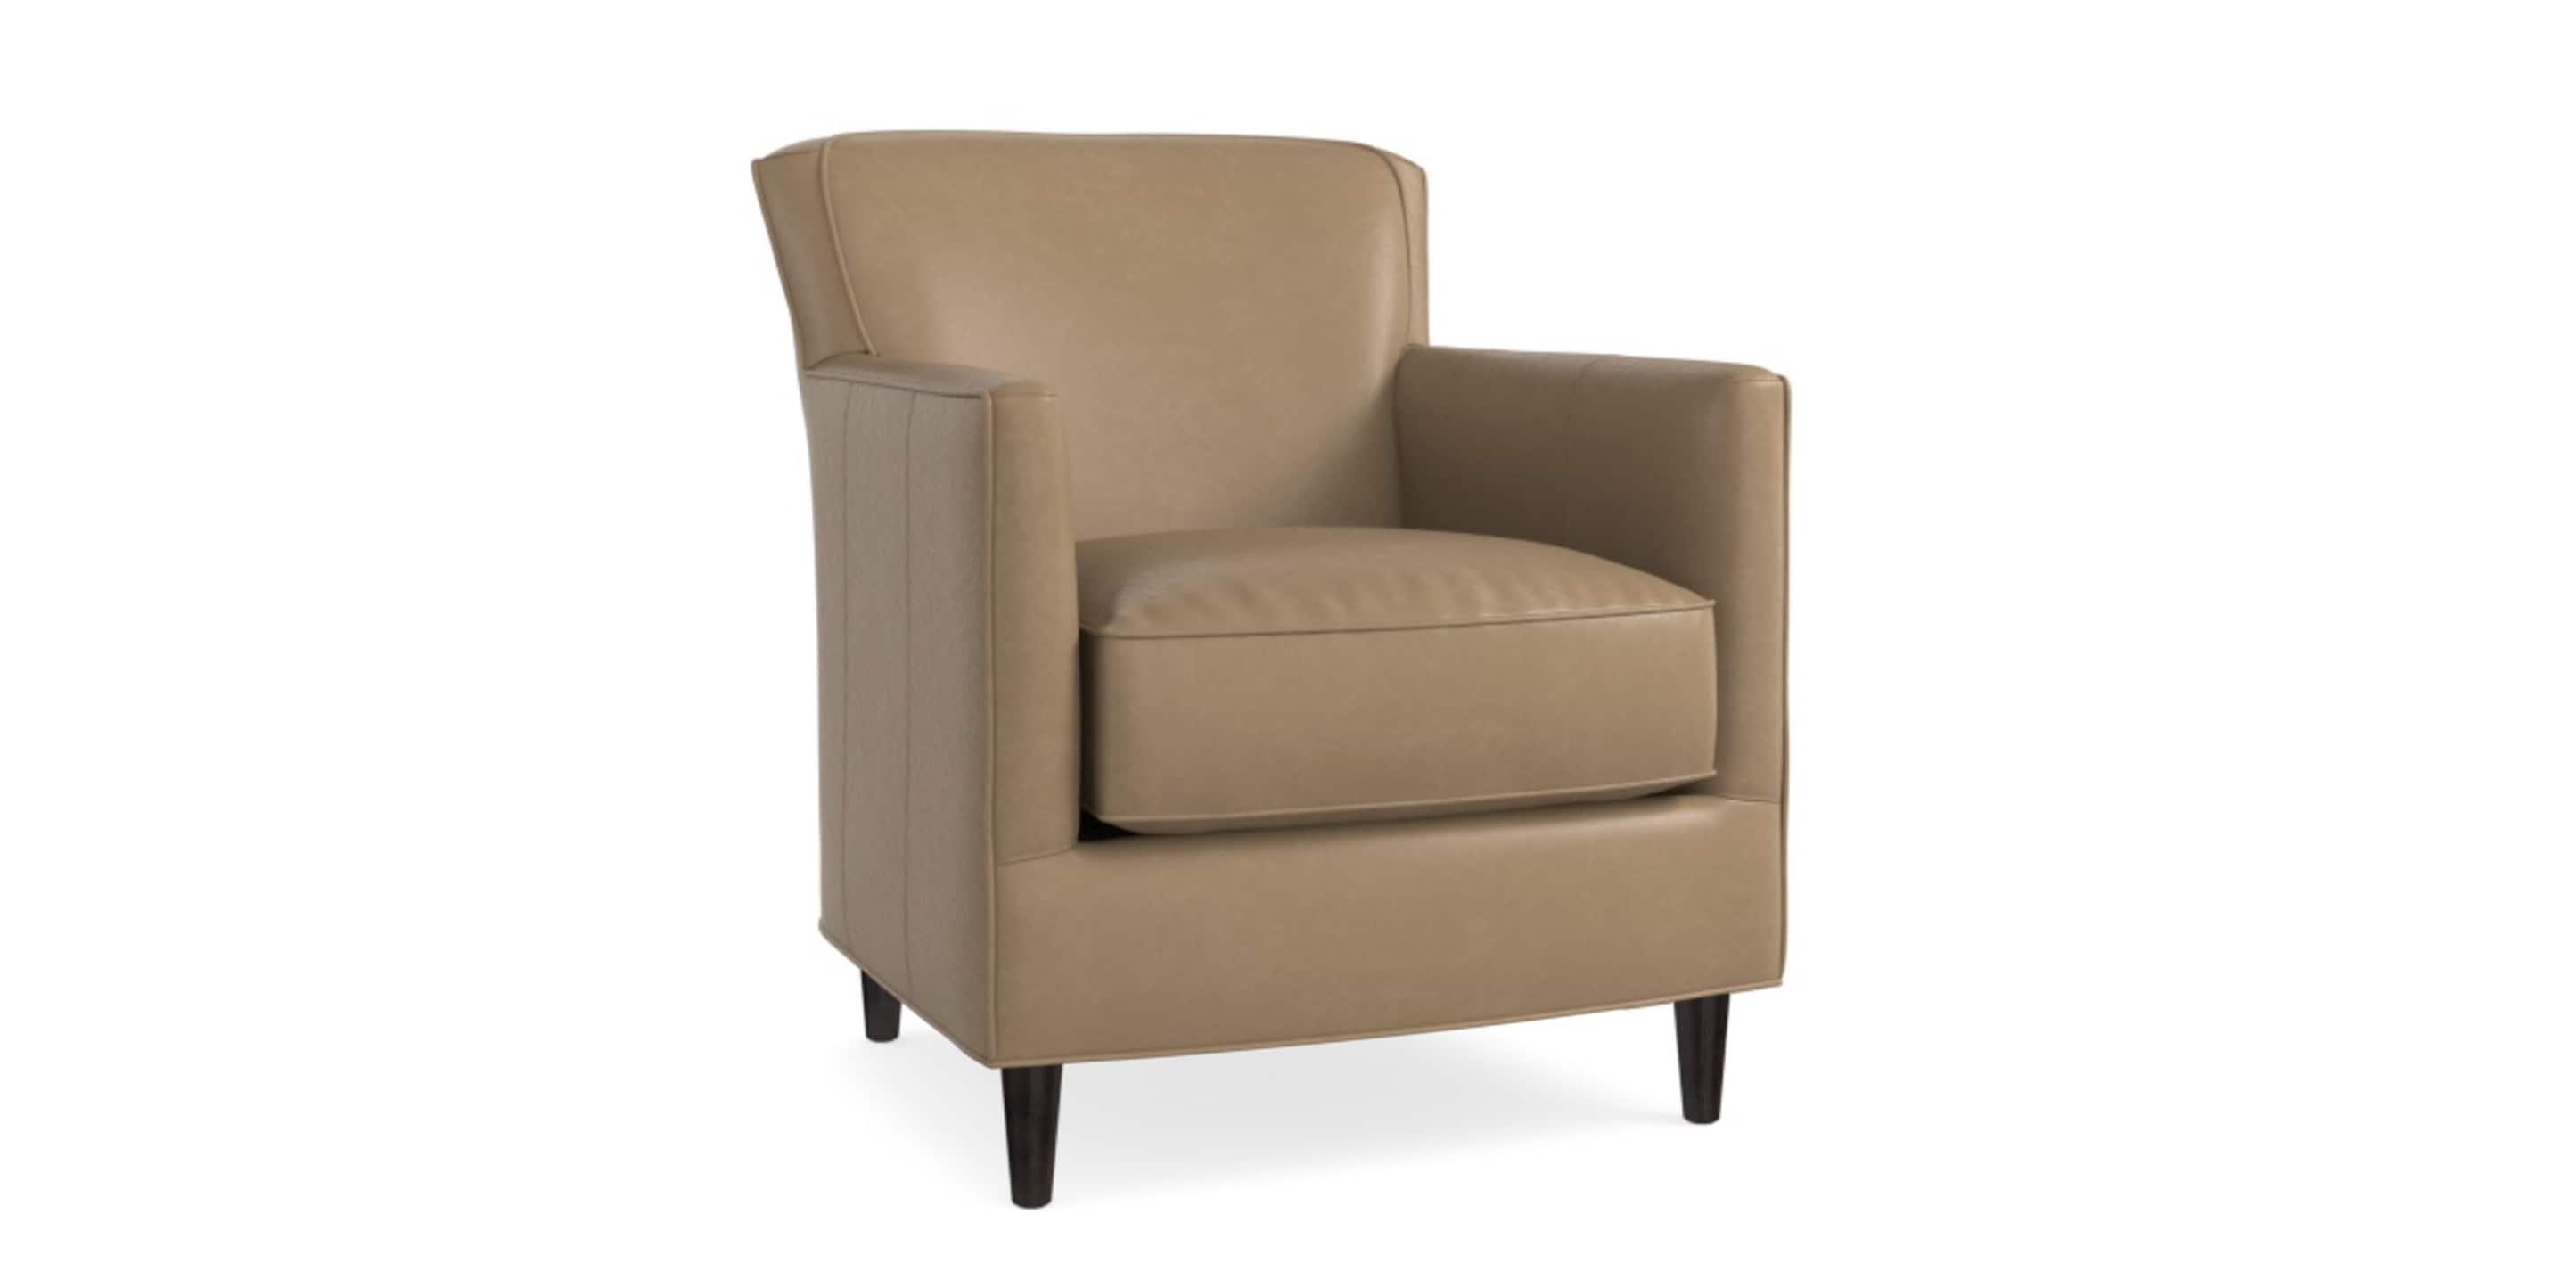 New American Living Leather Accent Chair